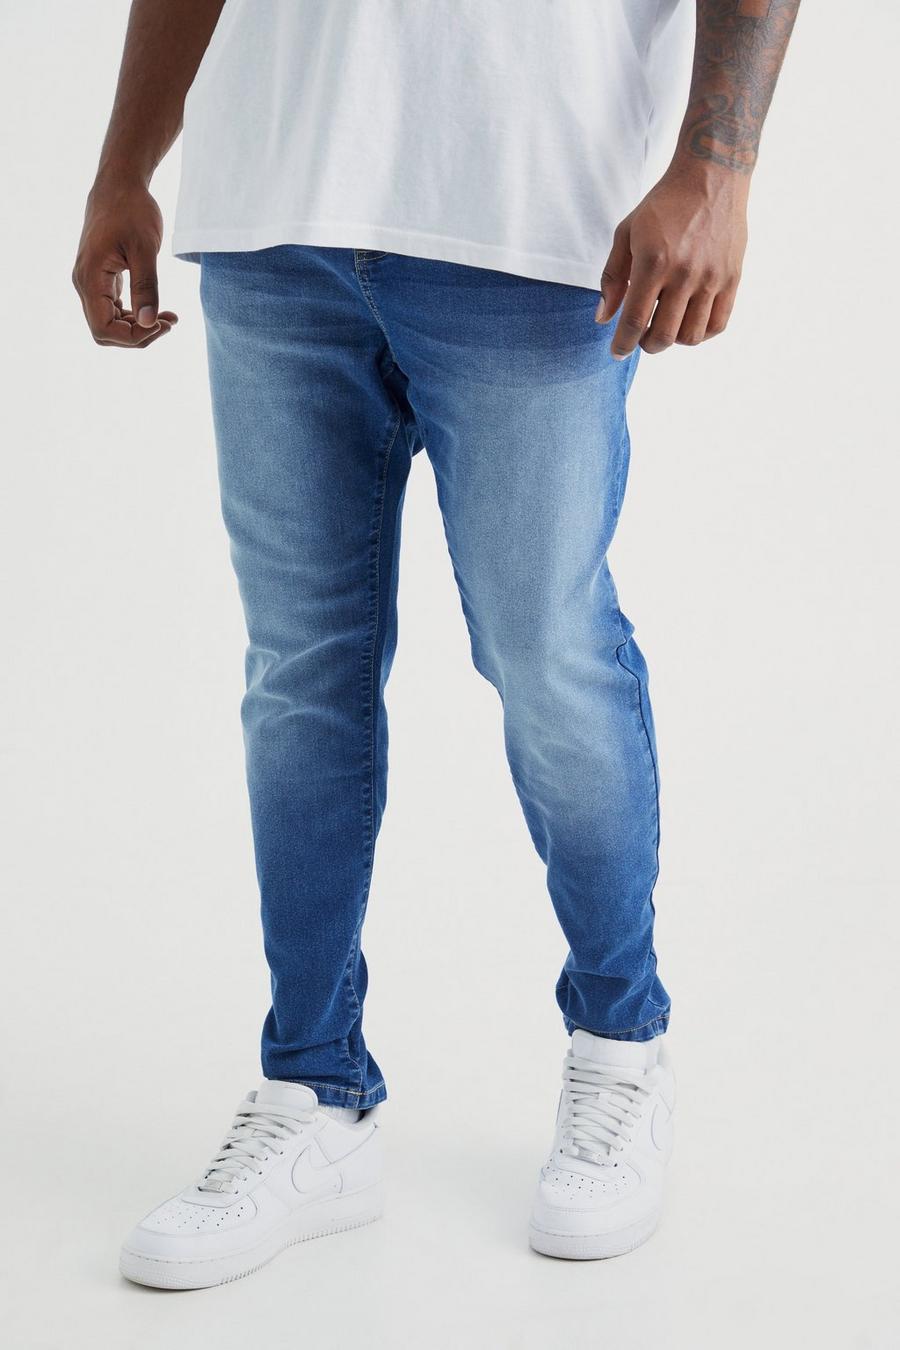 Pontalon Homme Jean Homme New Blue Ripped Tejanos Hombre Slim Pantalon  Hombre Straight Pantalones Vaqueros Casual Jeans for Man